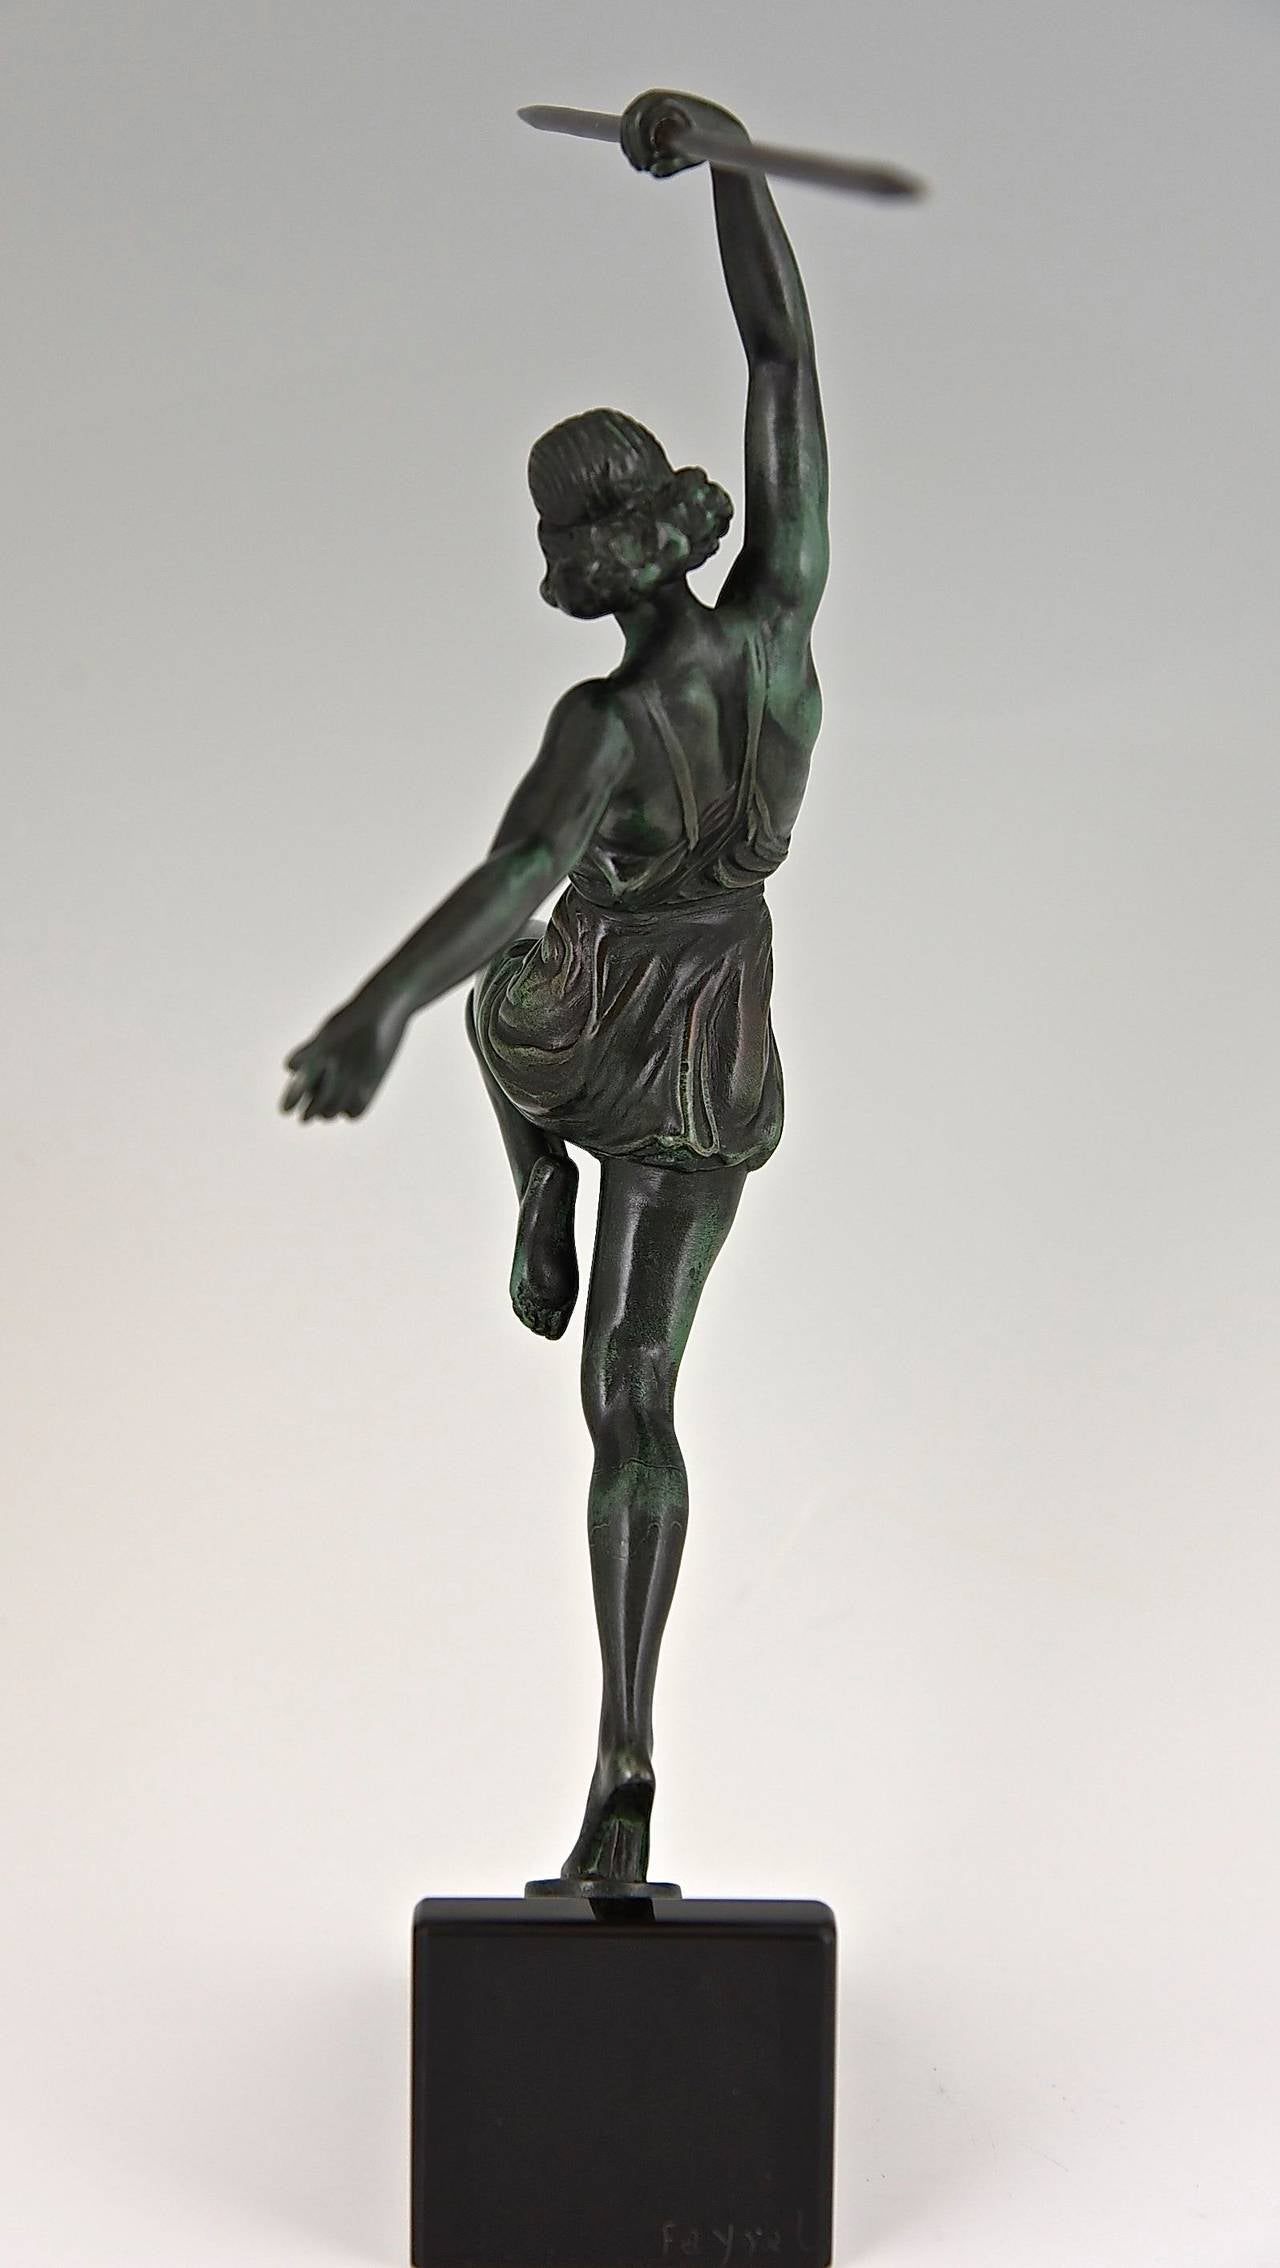 Art Deco javelin female thrower.
By Fayral, pseudonym for  Pierre Le Faguays.
Signature or marks:  Fayral.
Style: Art Deco.

Condition:  Good original condition, see pictures.
Date: circa 1935.
Material:  Metal with green patina.  Black